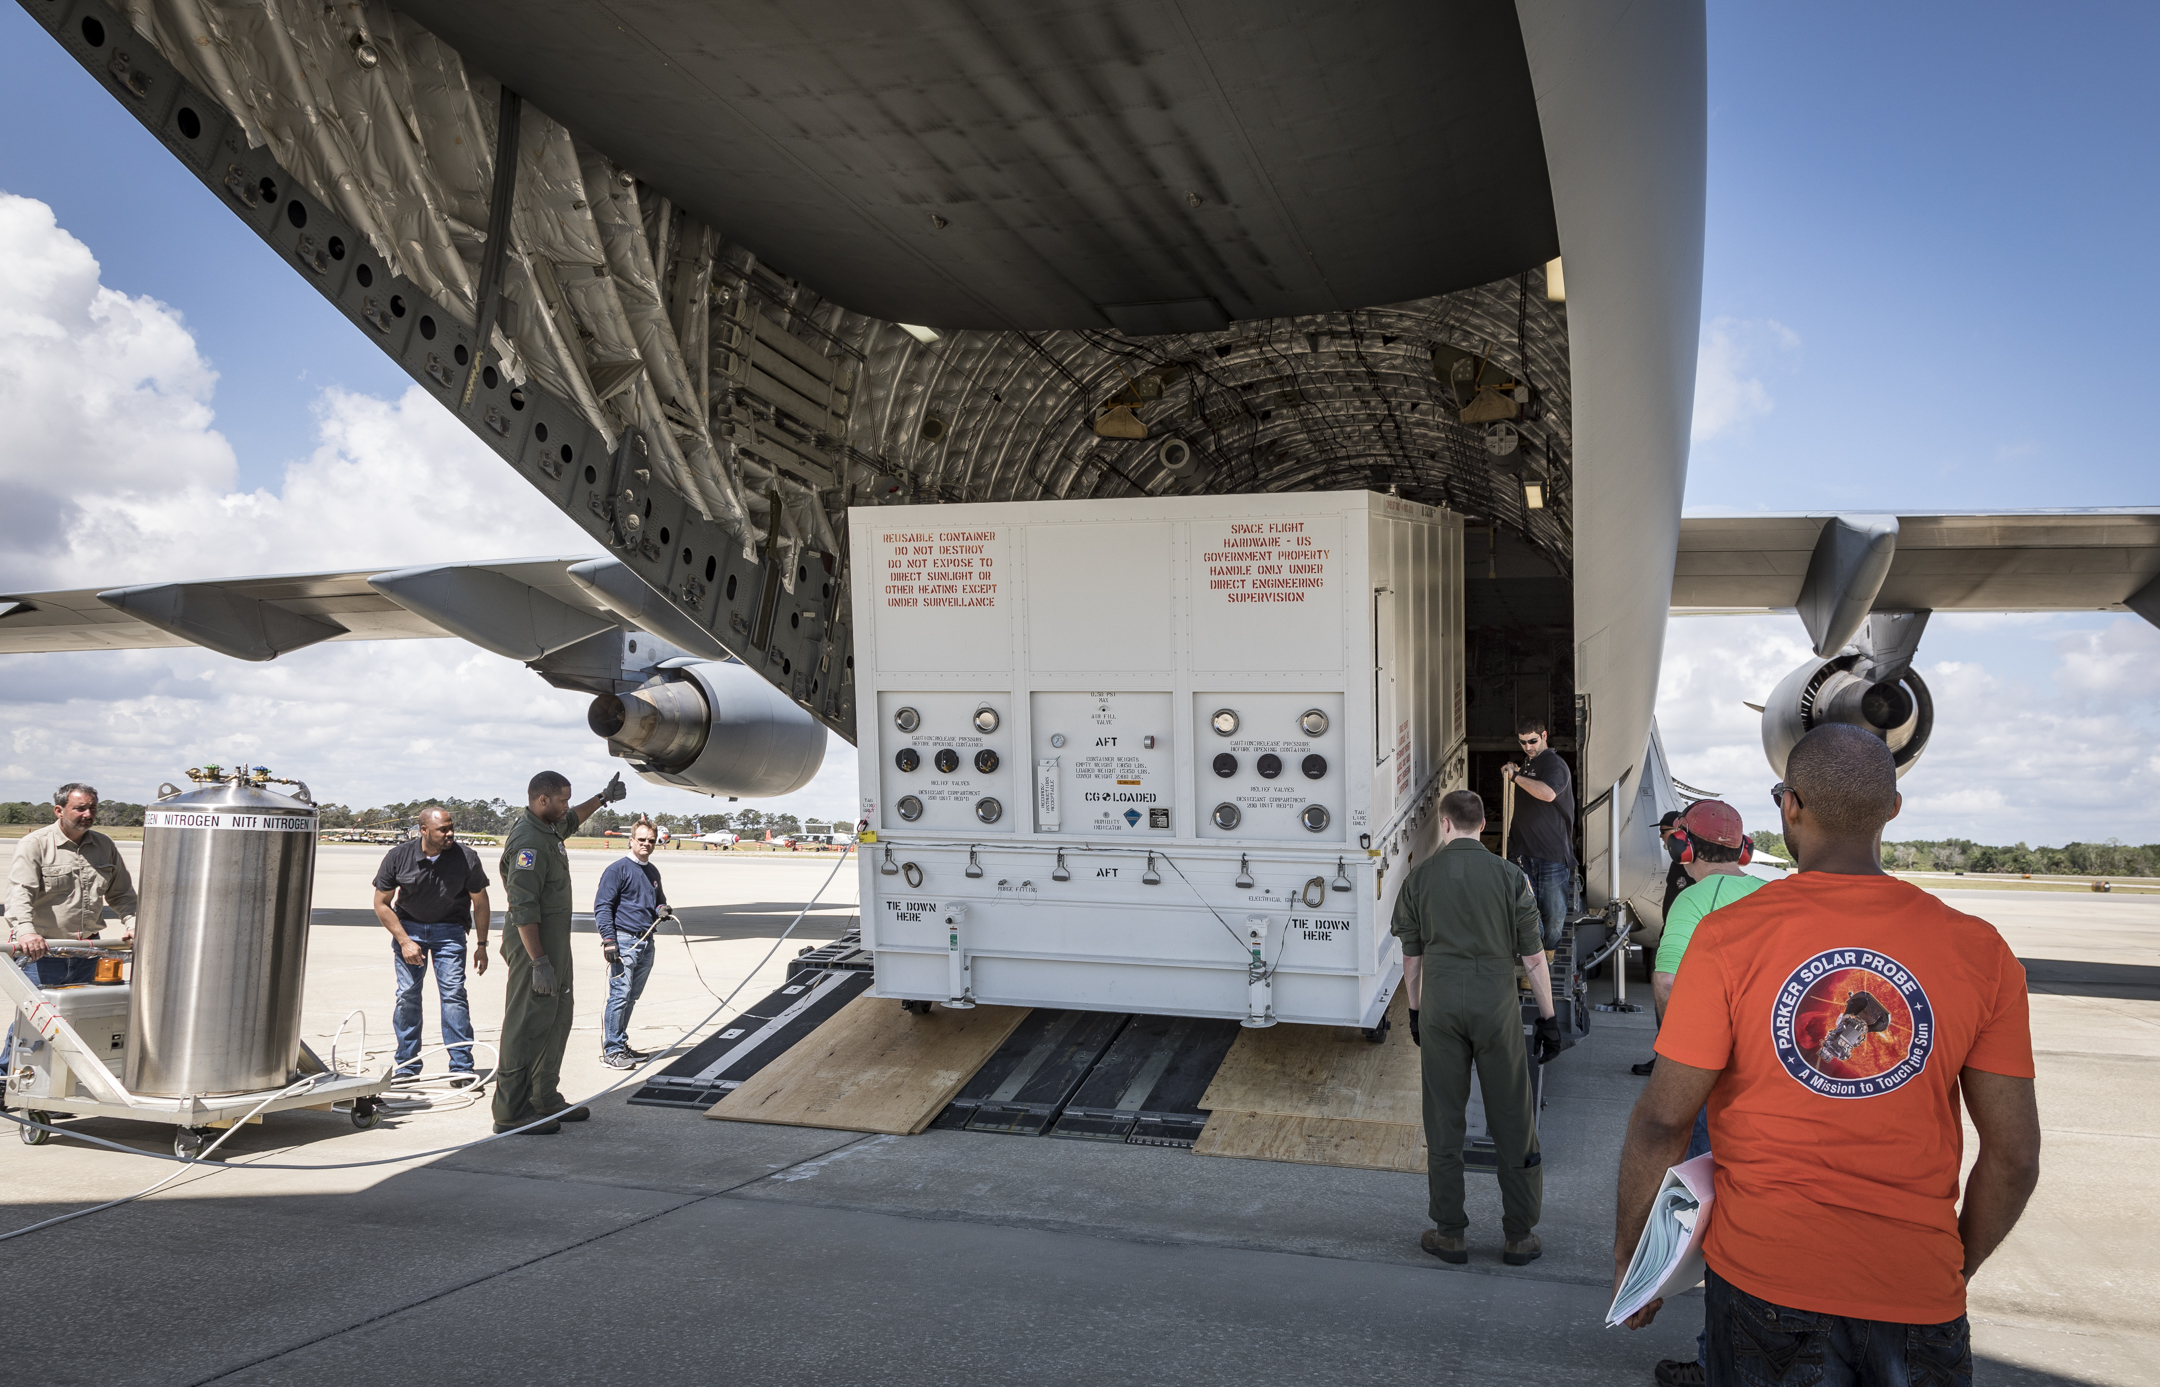 Securely packed in its custom transport container, NASA’s Parker Solar Probe is unloaded from the C-17 of the United States Air Force’s 436th Airlift Wing after landing at Space Coast Regional Airport in Titusville, Florida, on the morning of April 3, 2018. After unloading, the spacecraft was taken to Astrotech Space Operations, also in Titusville, for pre-launch testing and preparations. 